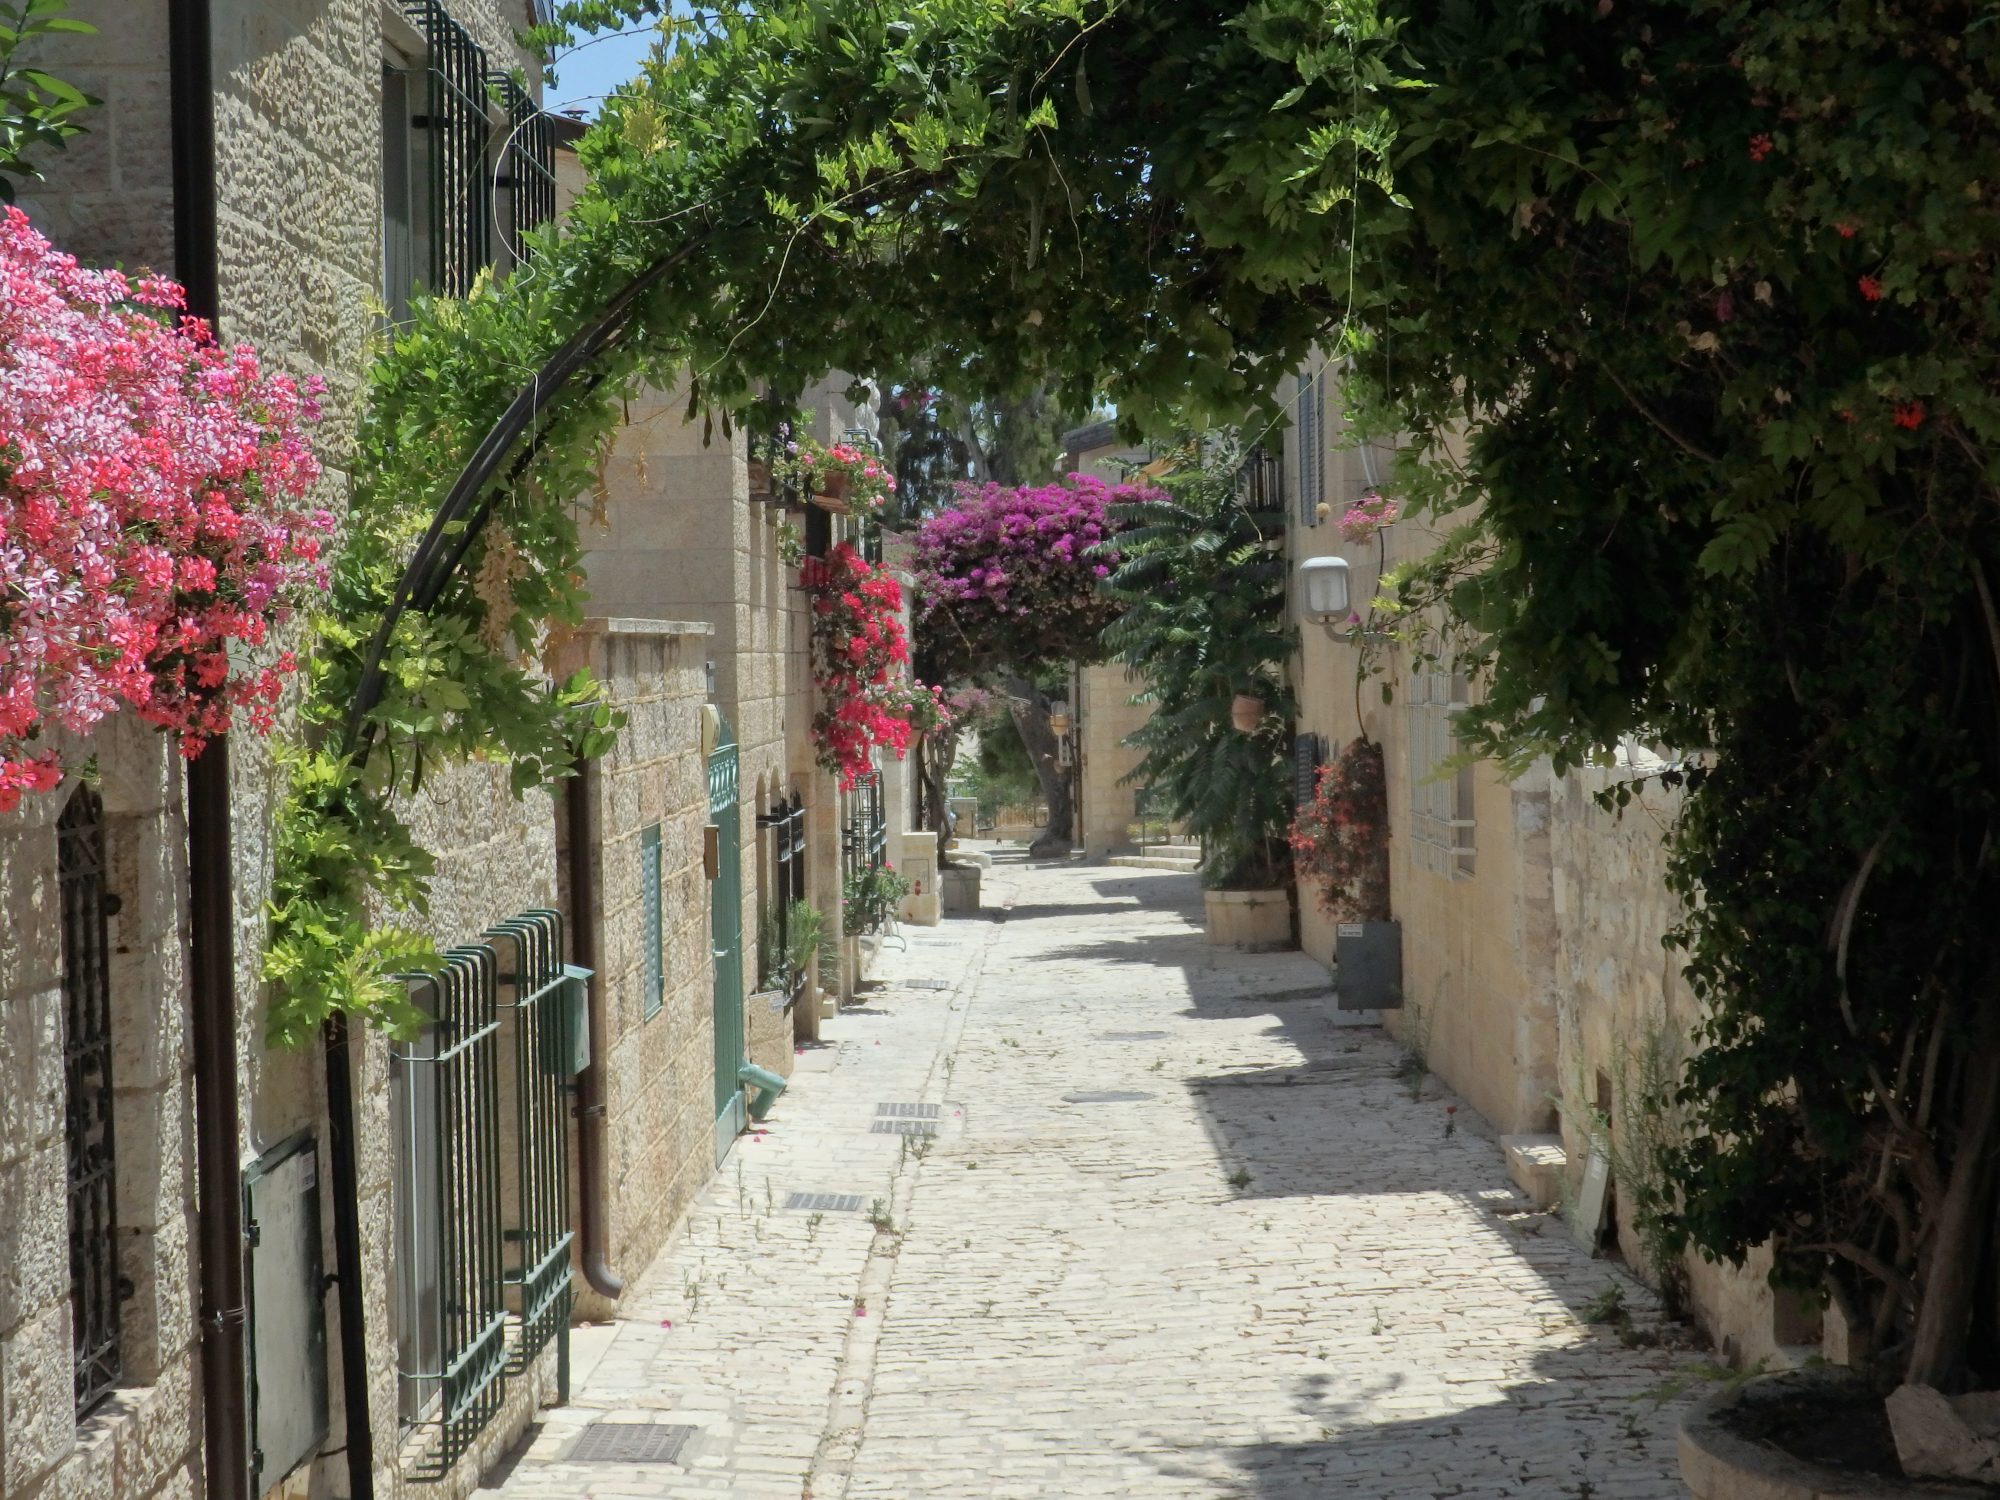 A street in Yemin Moshe, a neighborhood just outside the old walls of Jerusalem